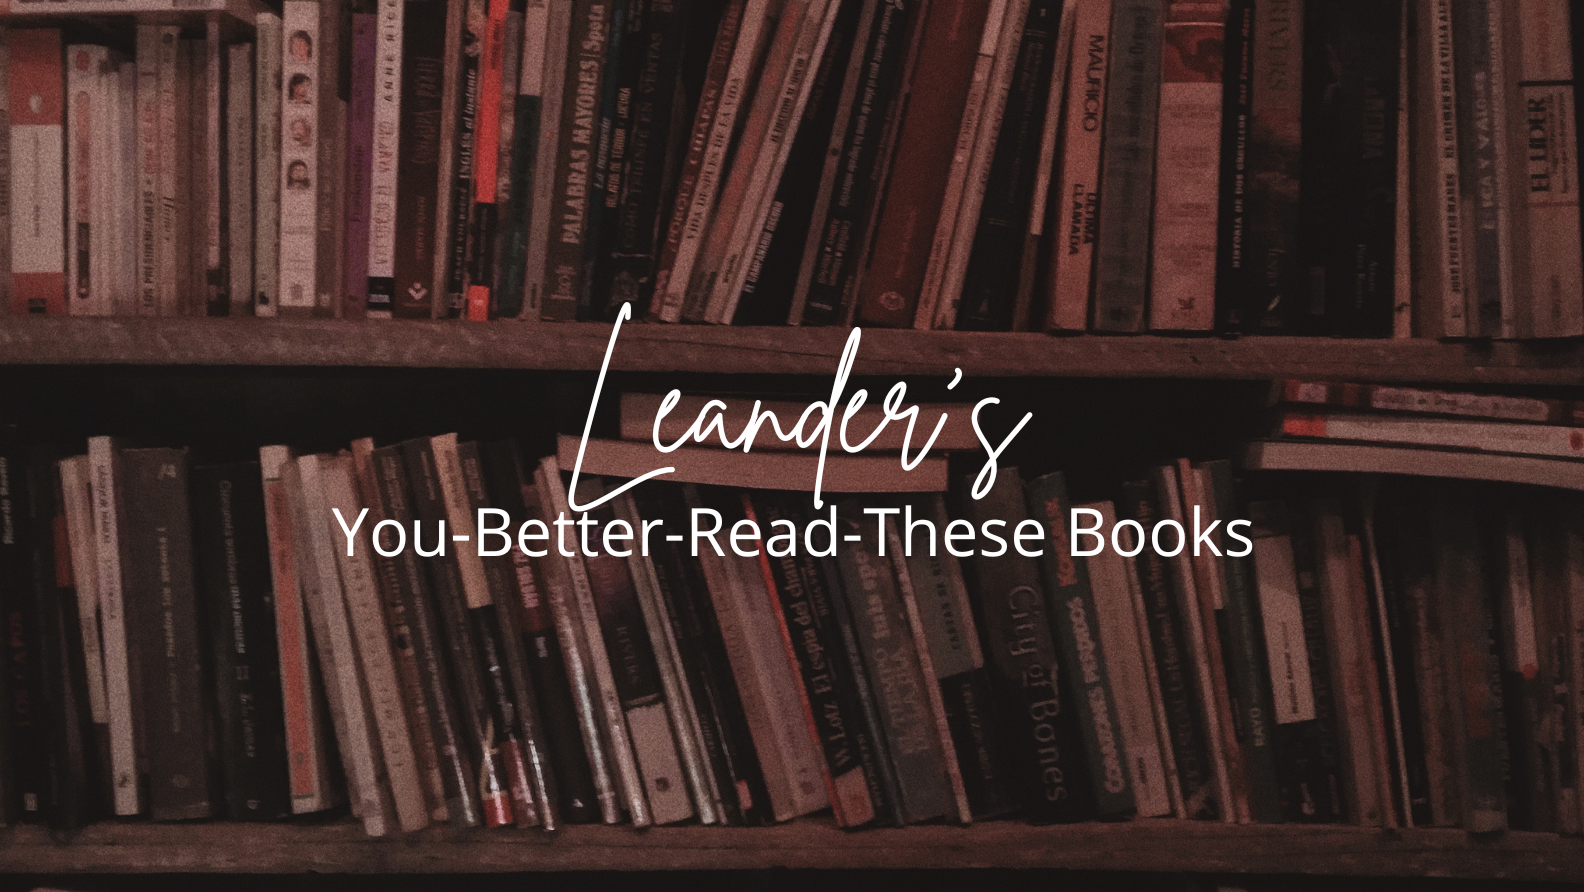 Leander's You-Better-Read-These Books | Vol. 002 [Hermione Granger]